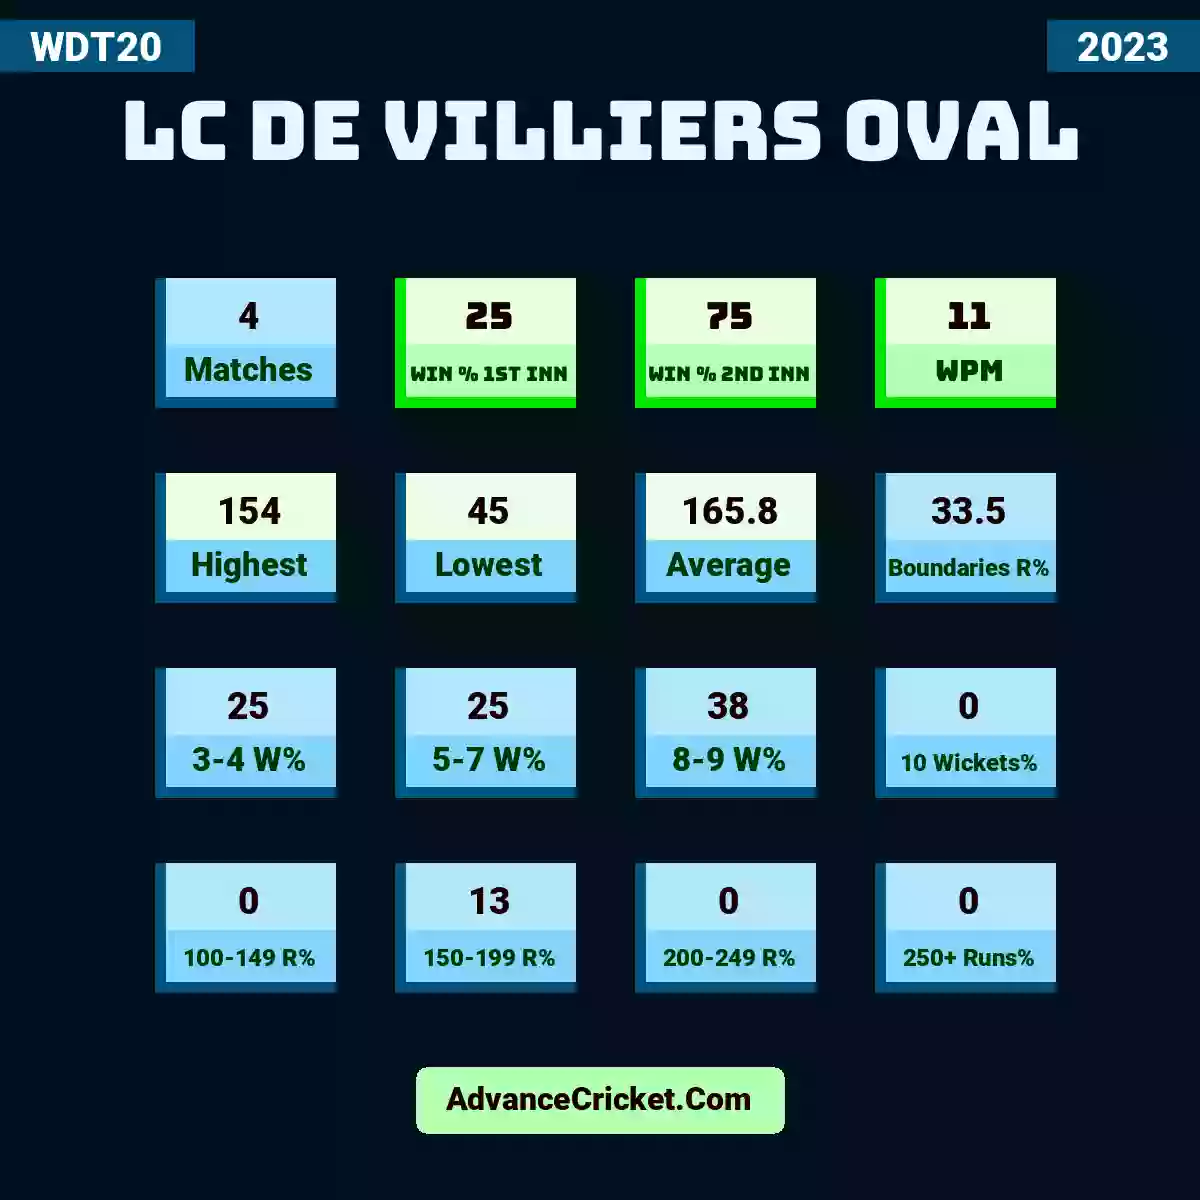 Image showing LC de Villiers Oval with Matches: 4, Win % 1st Inn: 25, Win % 2nd Inn: 75, WPM: 11, Highest: 154, Lowest: 45, Average: 165.8, Boundaries R%: 33.5, 3-4 W%: 25, 5-7 W%: 25, 8-9 W%: 38, 10 Wickets%: 0, 100-149 R%: 0, 150-199 R%: 13, 200-249 R%: 0, 250+ Runs%: 0.